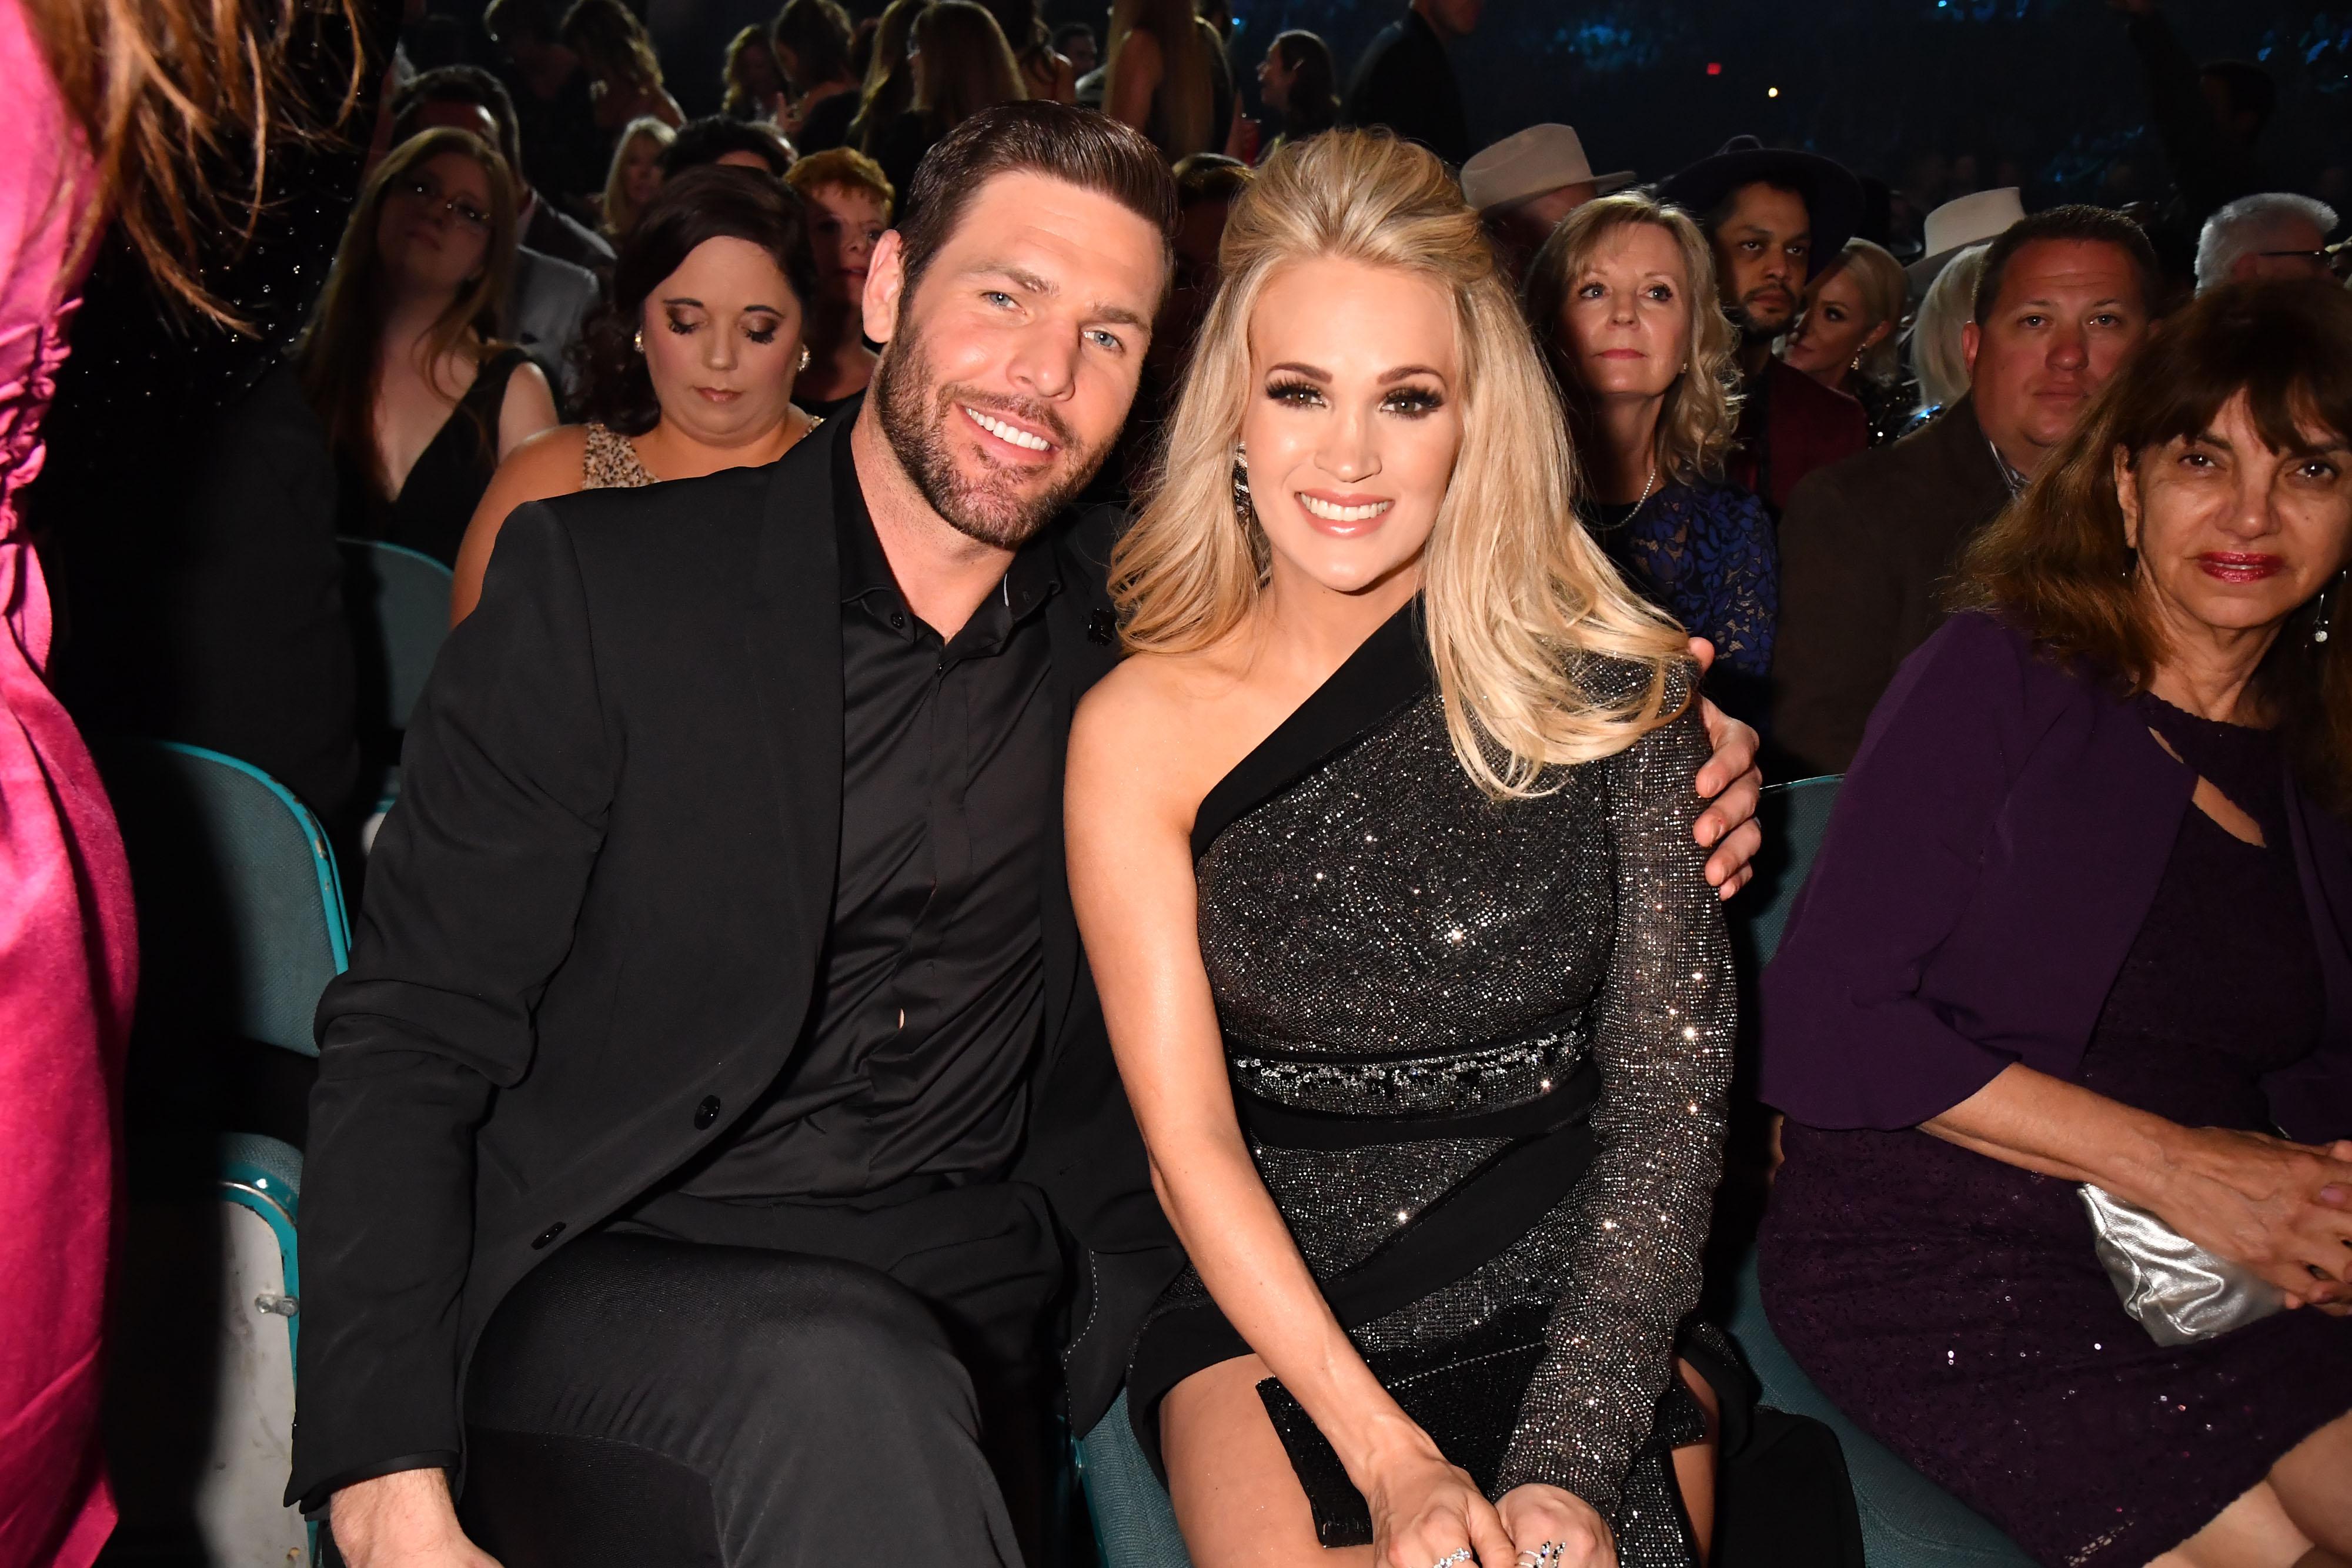 Is Carrie Underwood Worth More Than Her Husband Mike Fisher? - The Blast